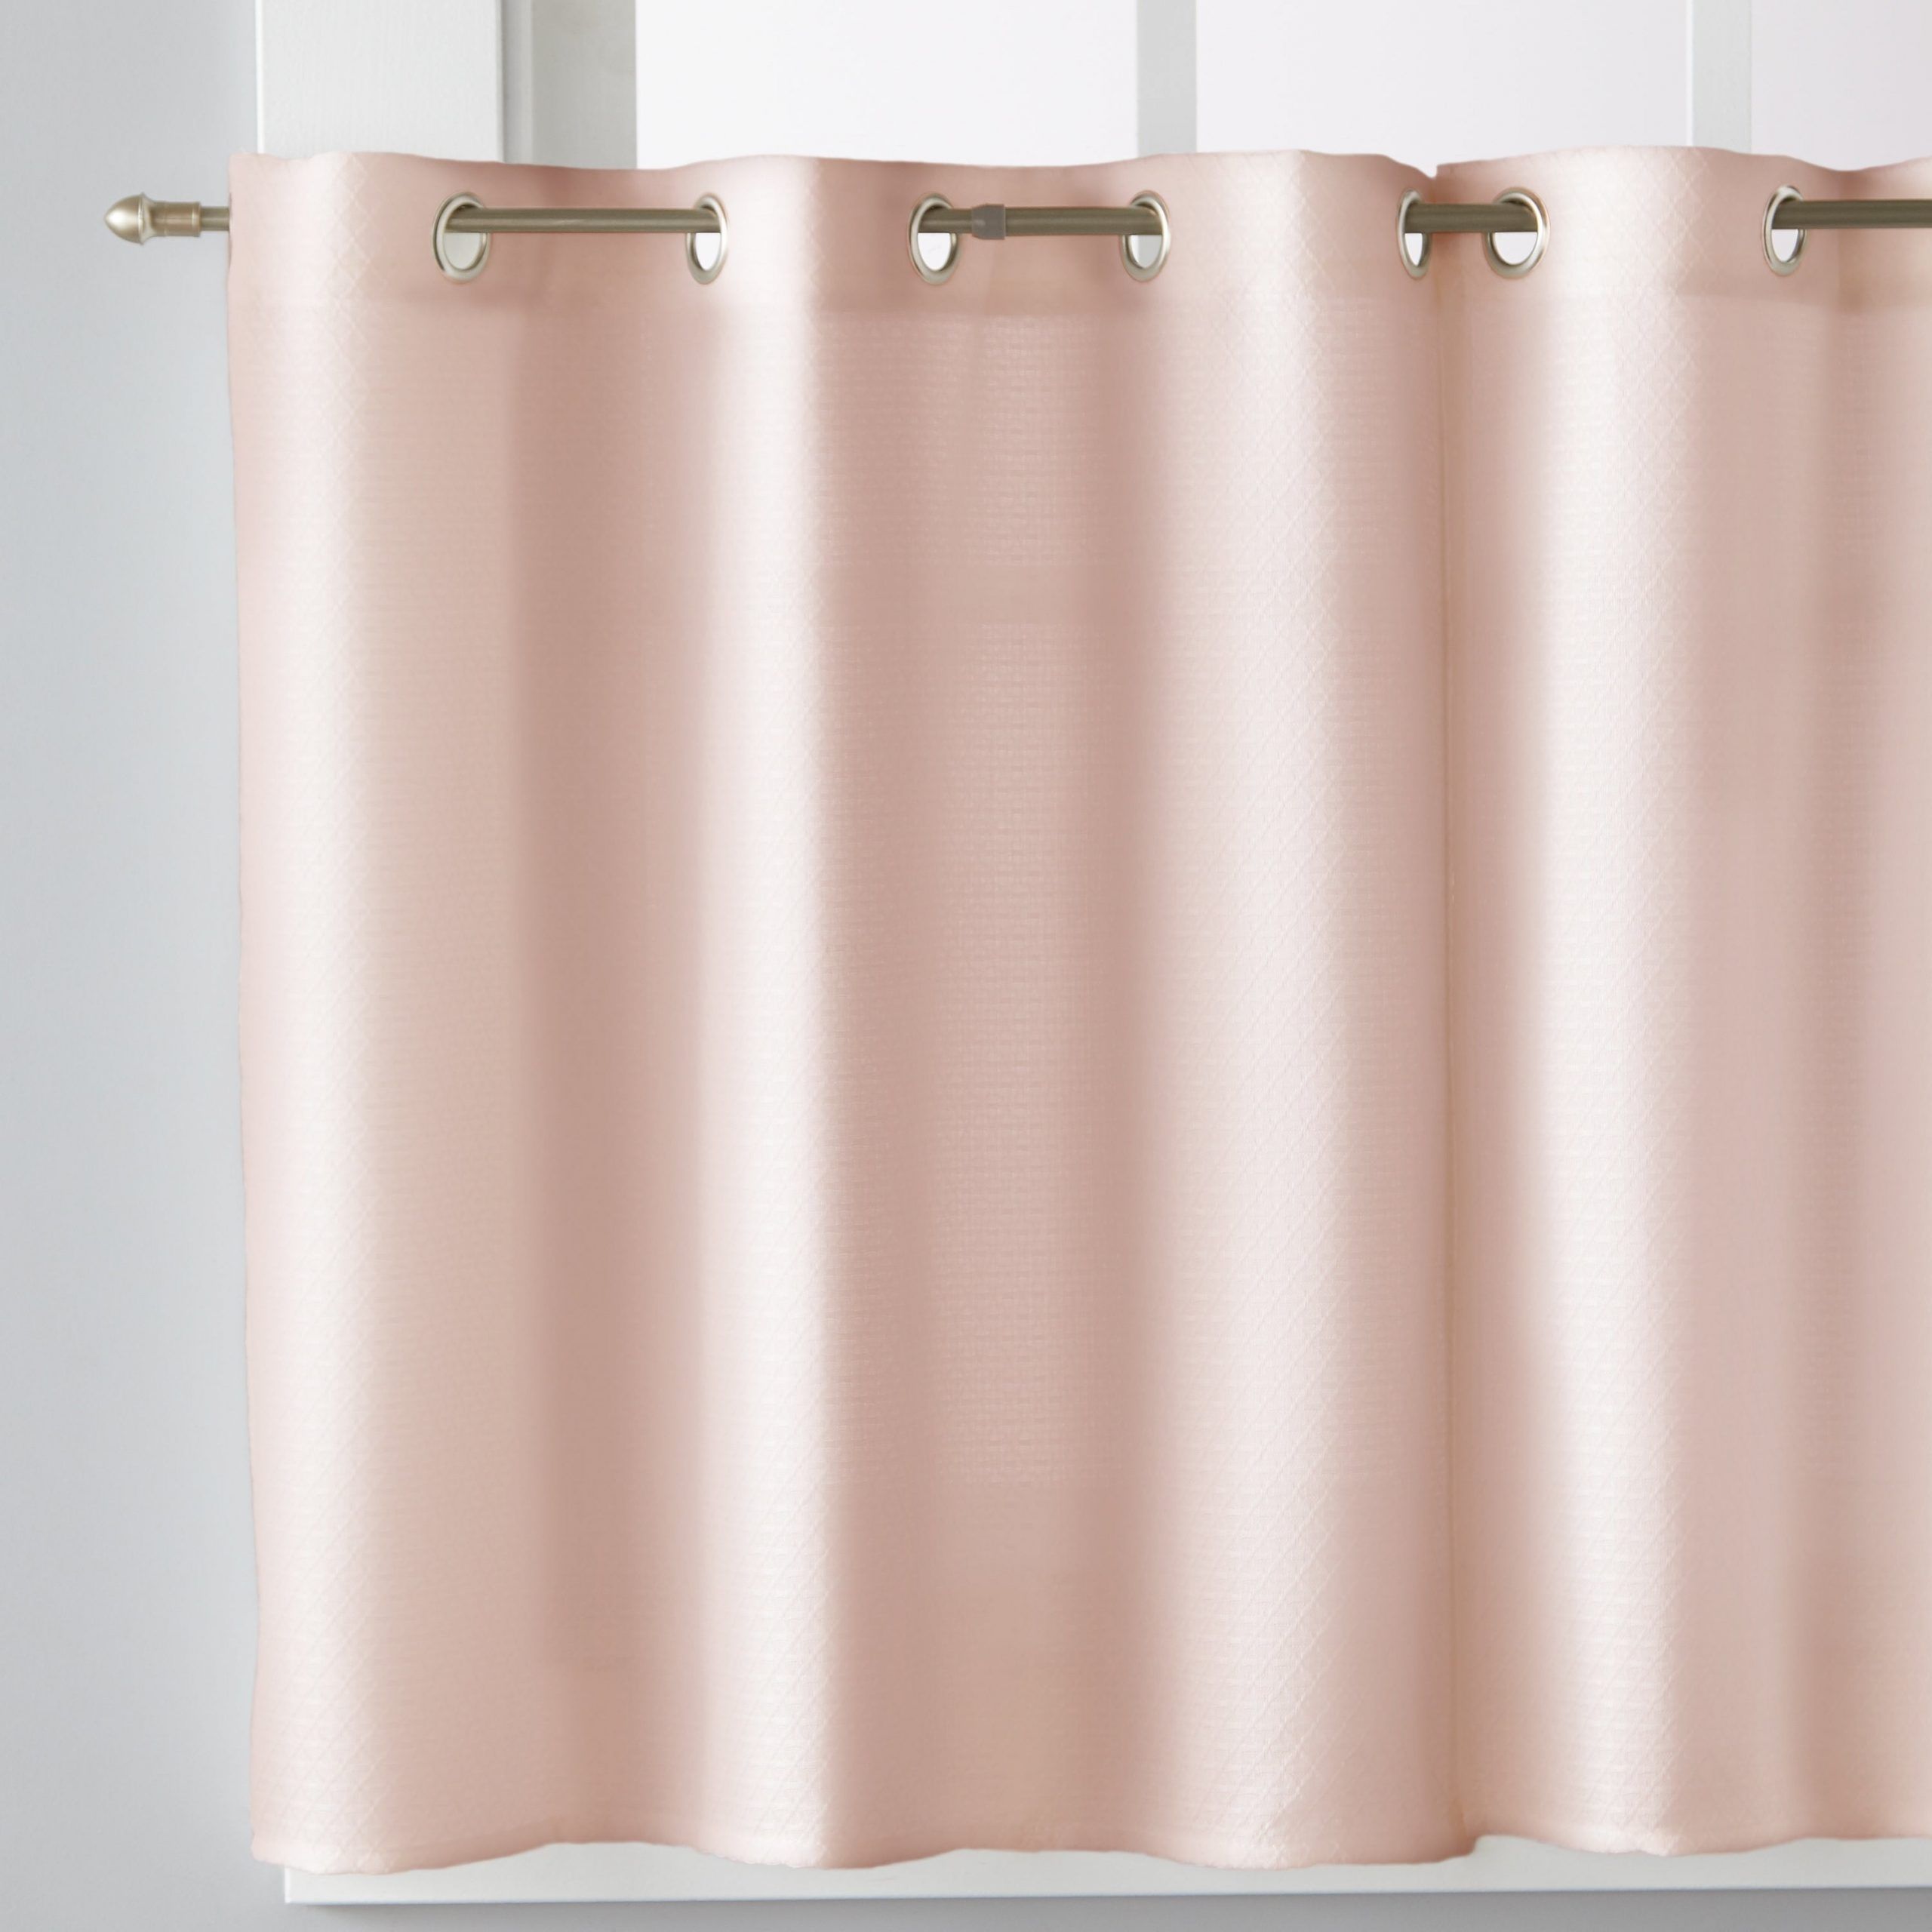 Skl Home Trio 24 Inch Tier Pair In Blush Inside Porch & Den Park Point Blush 24 Inch Tier Pairs (View 6 of 20)